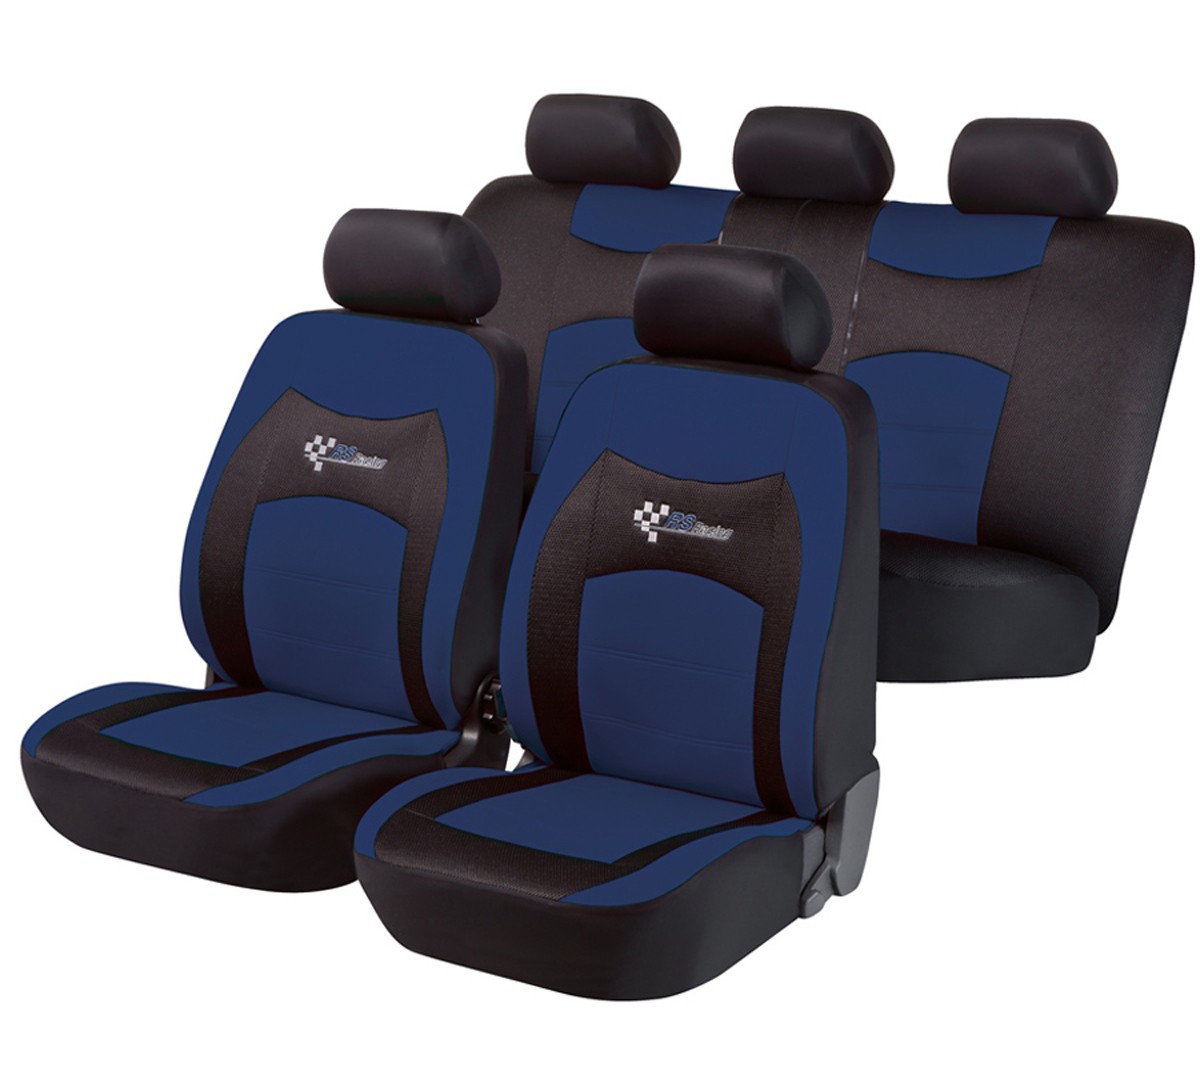 Toyota Yaris, seat covers, black, blue, complete set, | carseatcovers24